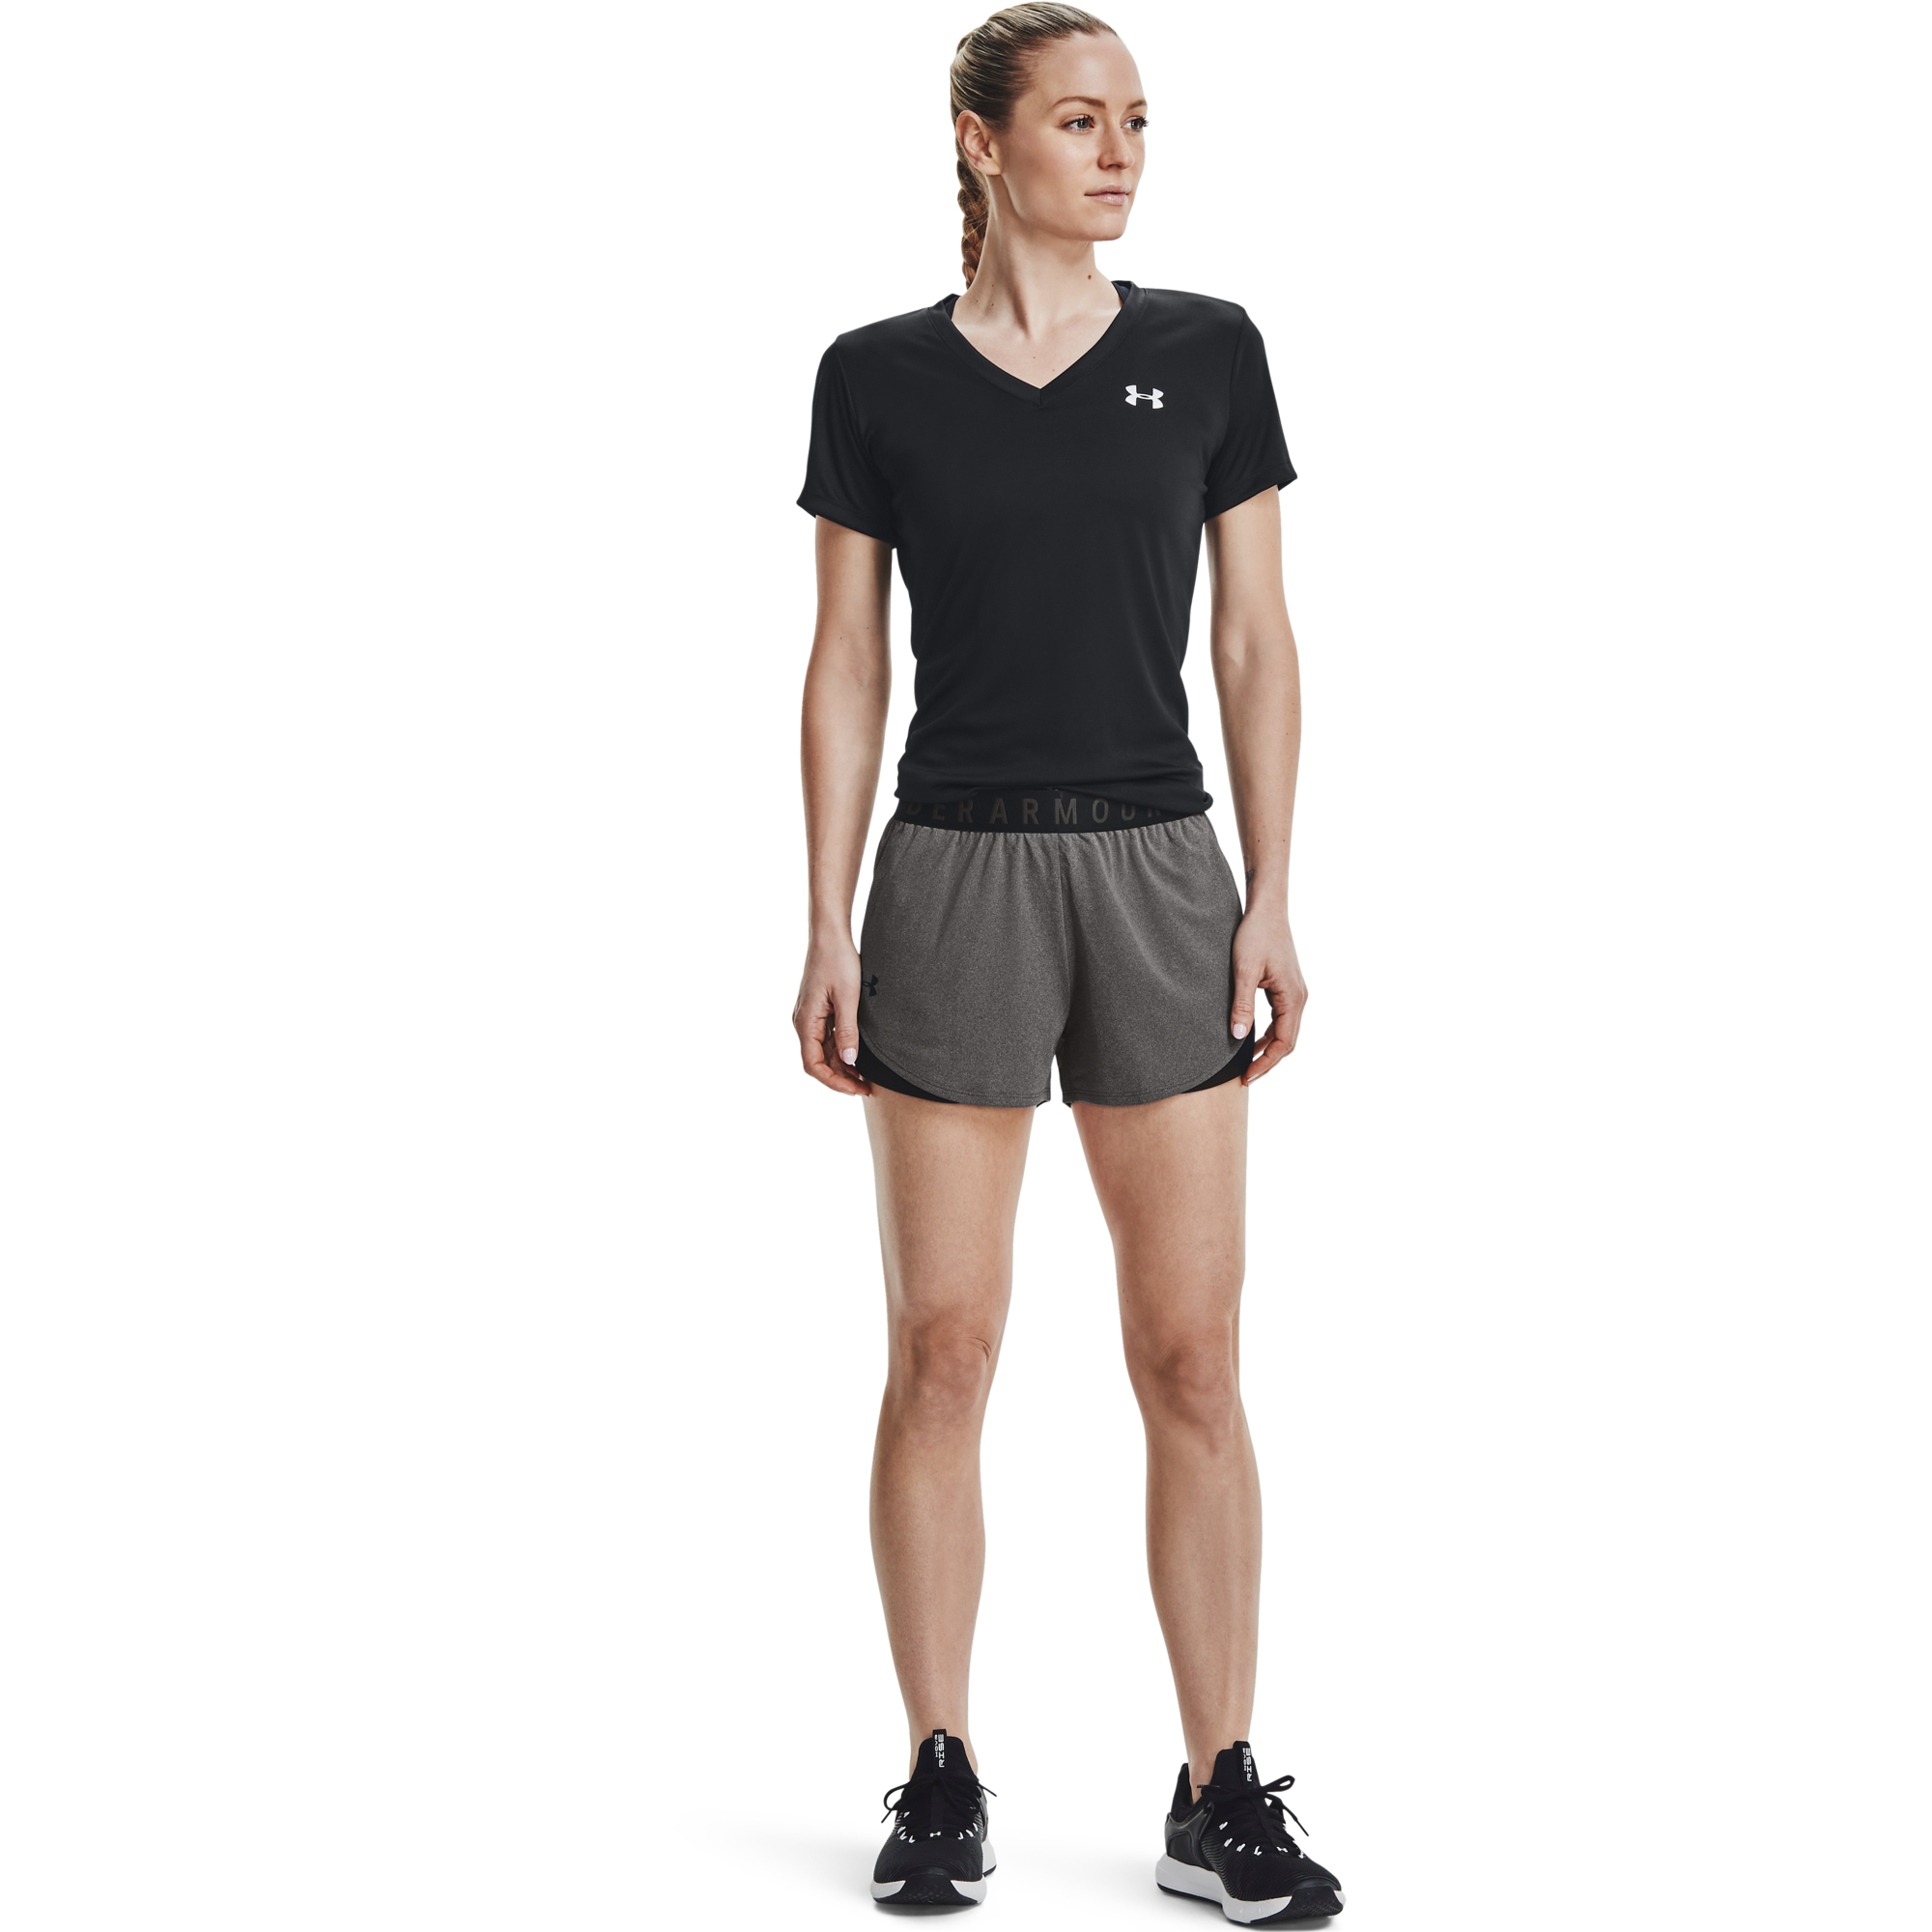 Women's Play Up Shorts 3.0 Carbon Heather, Buy Women's Play Up Shorts 3.0  Carbon Heather here